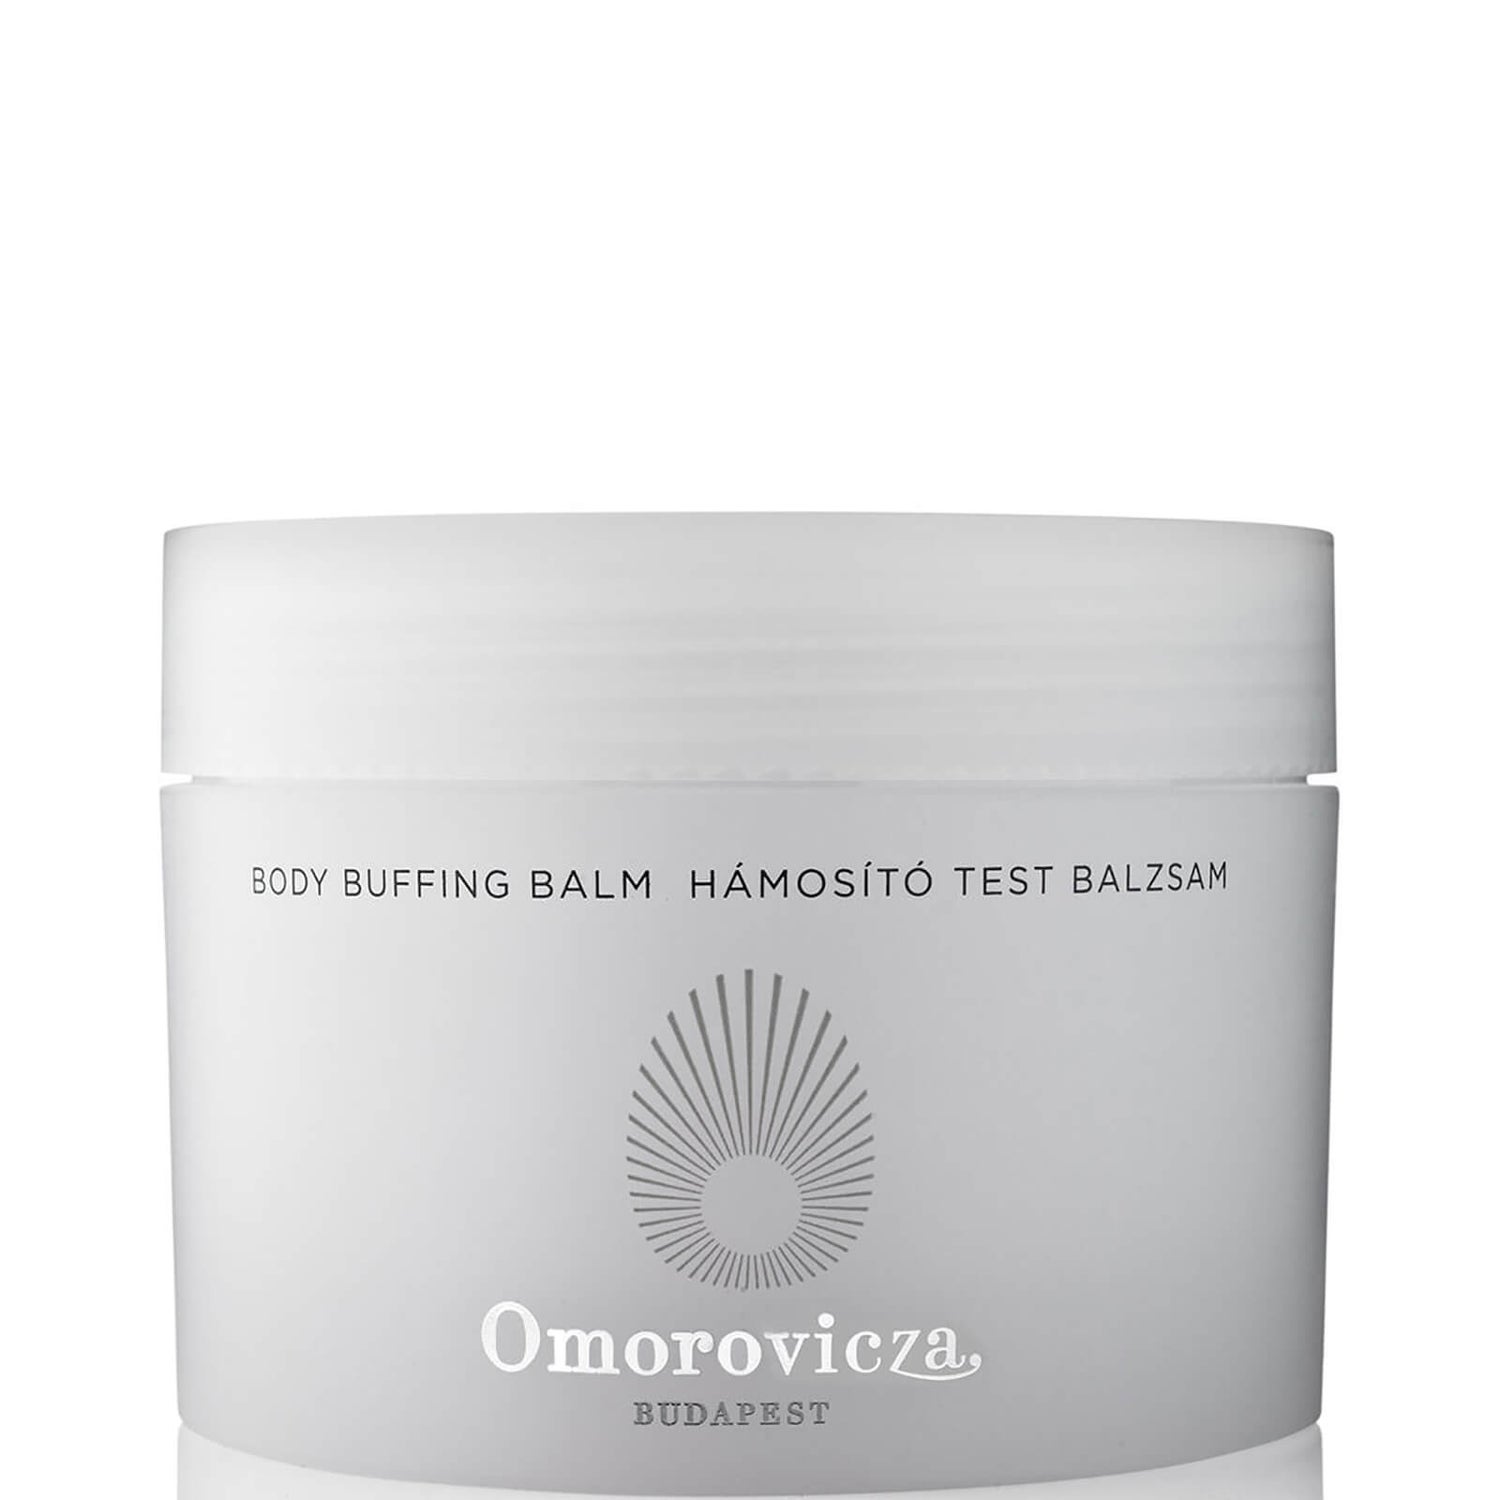 Baume gommage corps Omorovicza 150ml